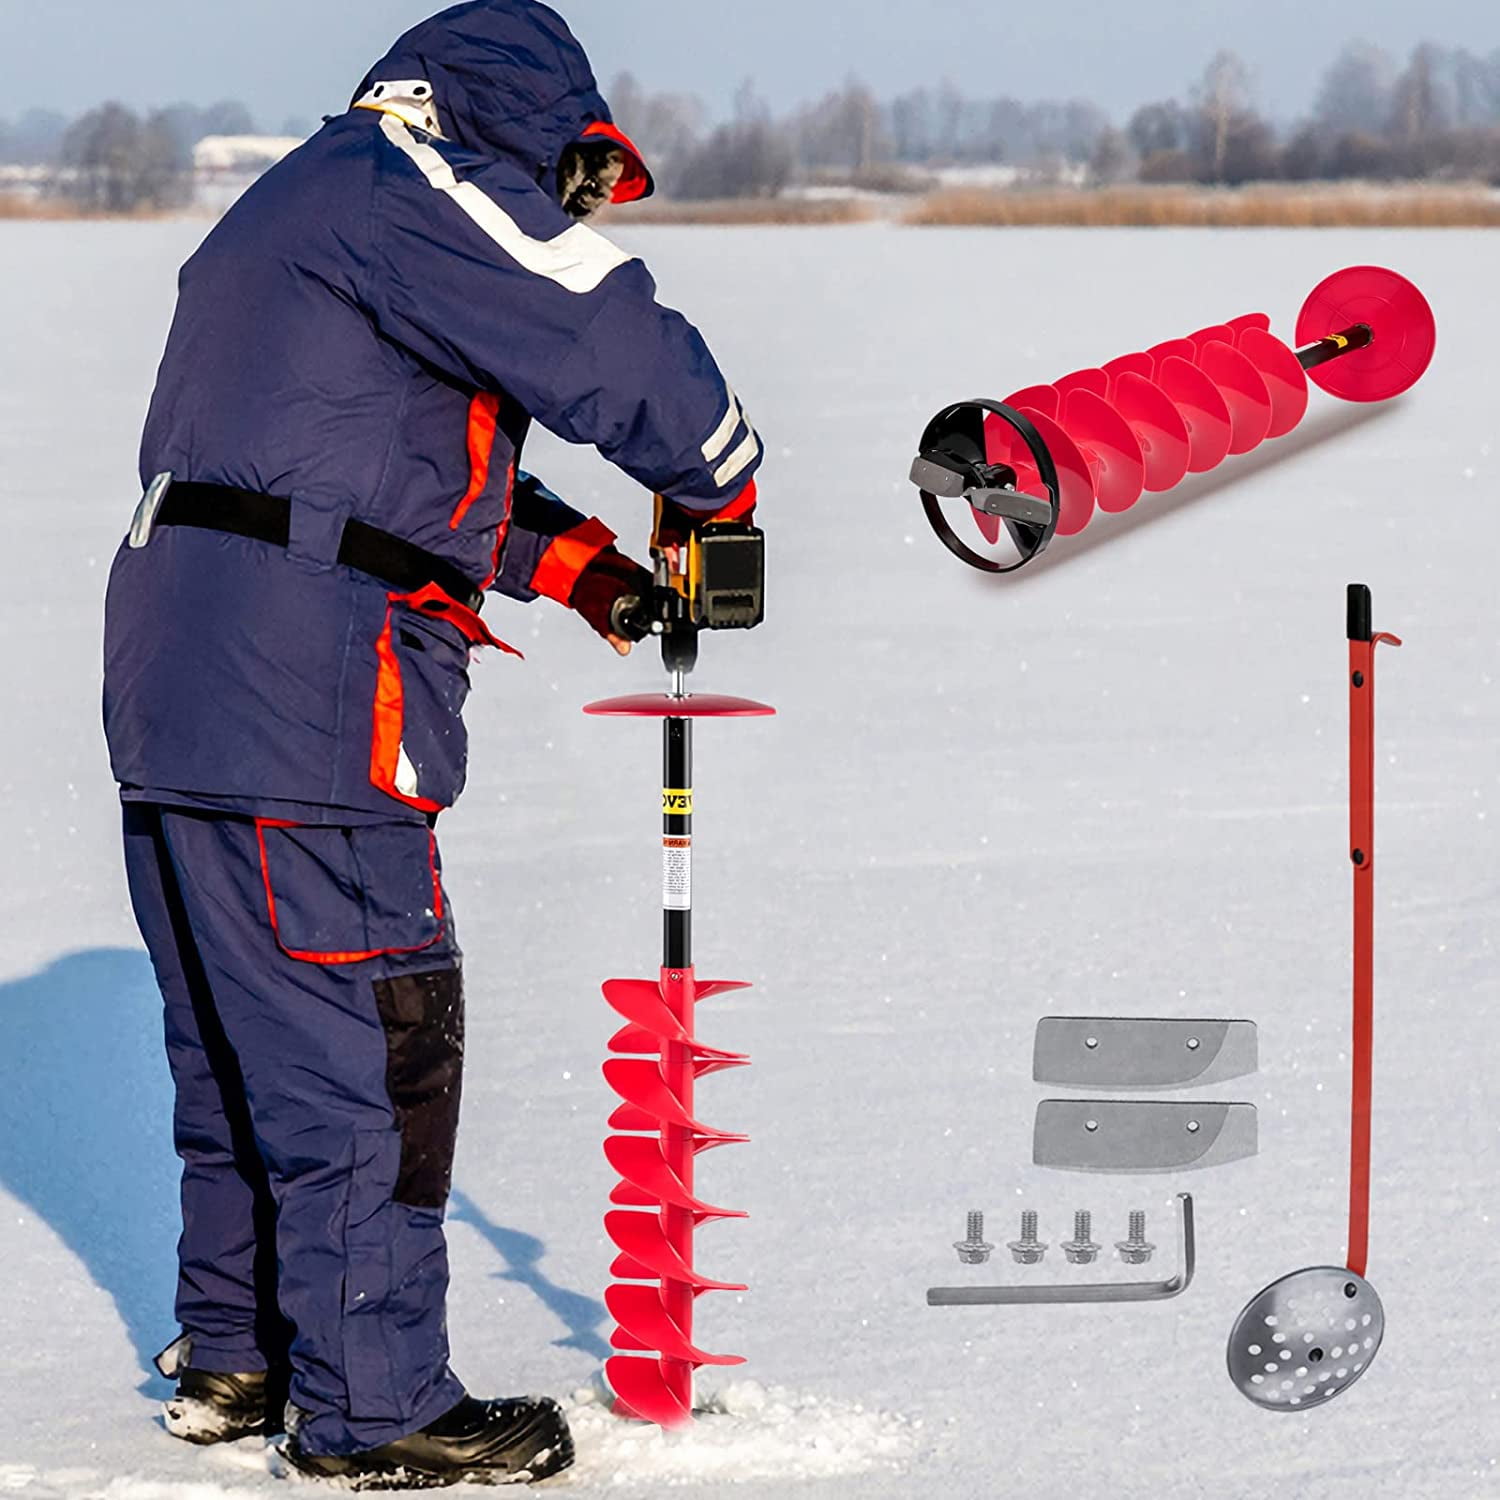 VEVOR Ice Drill Auger, 6 Diameter Nylon Ice Auger, 39 Length Ice Auger Bit,Auger Drill with 11.8 Extension Rod,Auger Bit w/ Drill Adapter,Top